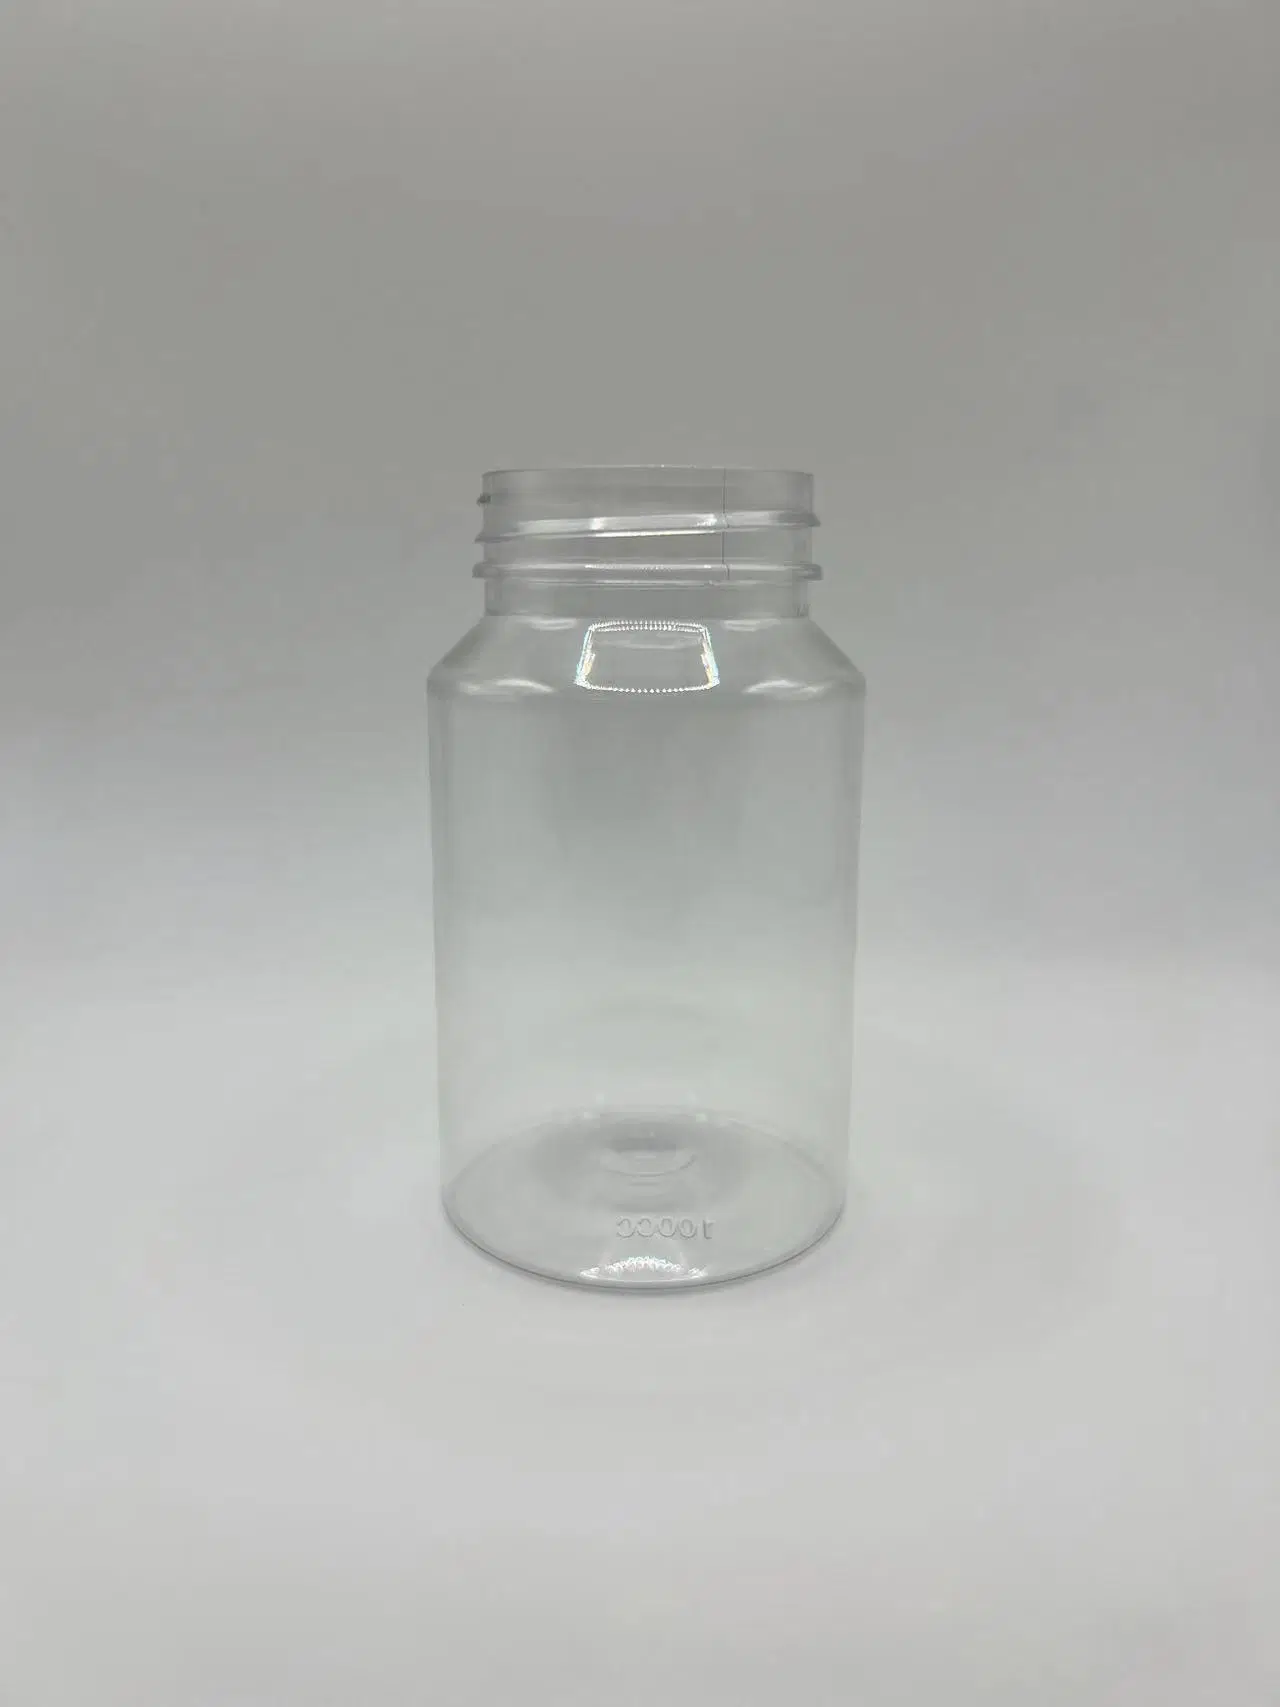 Pet 100ml Health Care Products Drugs Shoulder Round Customizable Plastic Bottles